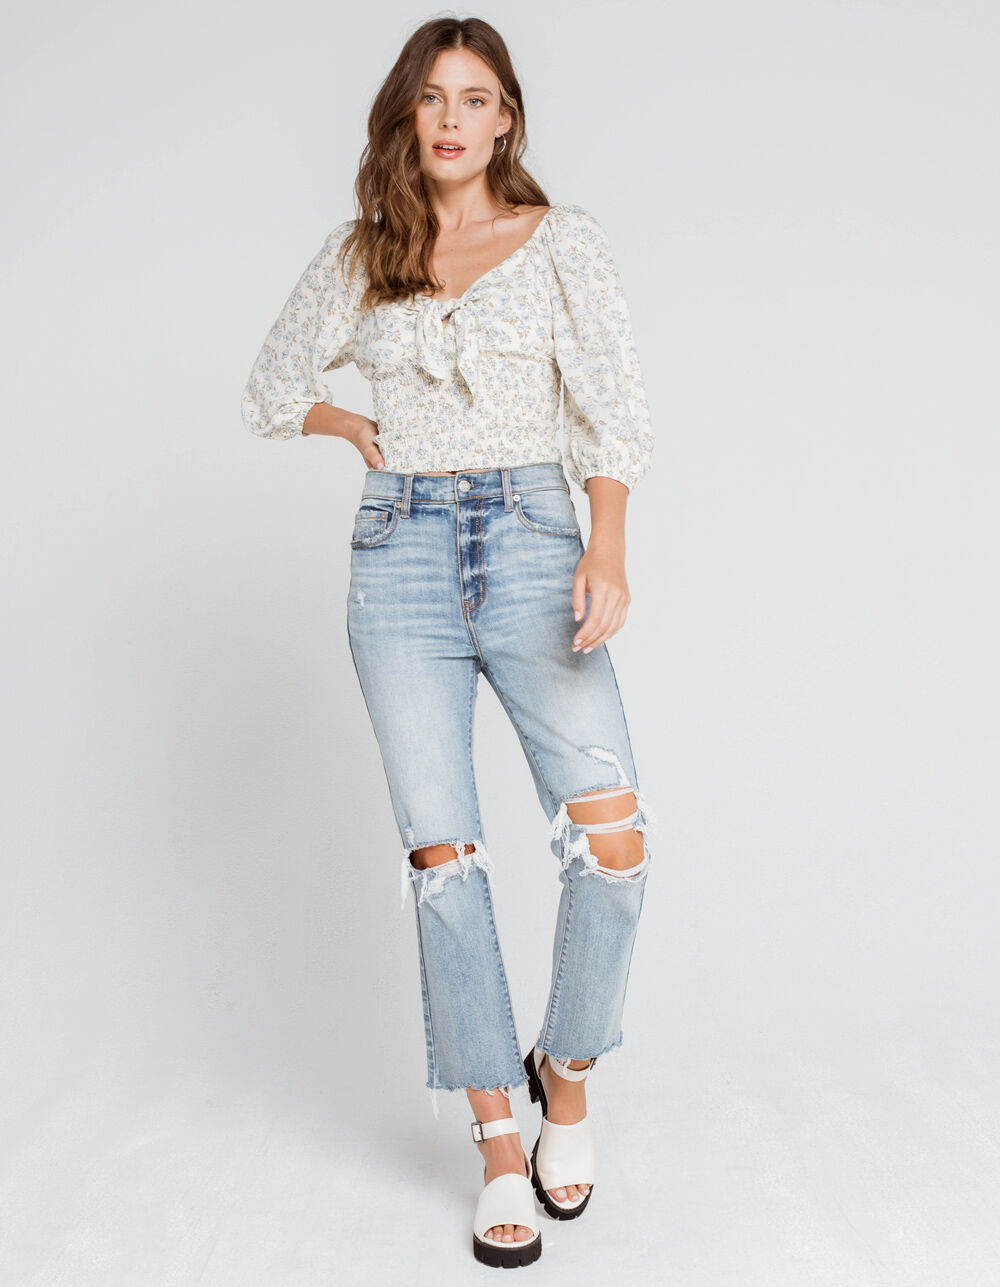 WEST OF MELROSE Flower Hour Tie Front Smocked Top - WHITE COMBO | Tillys